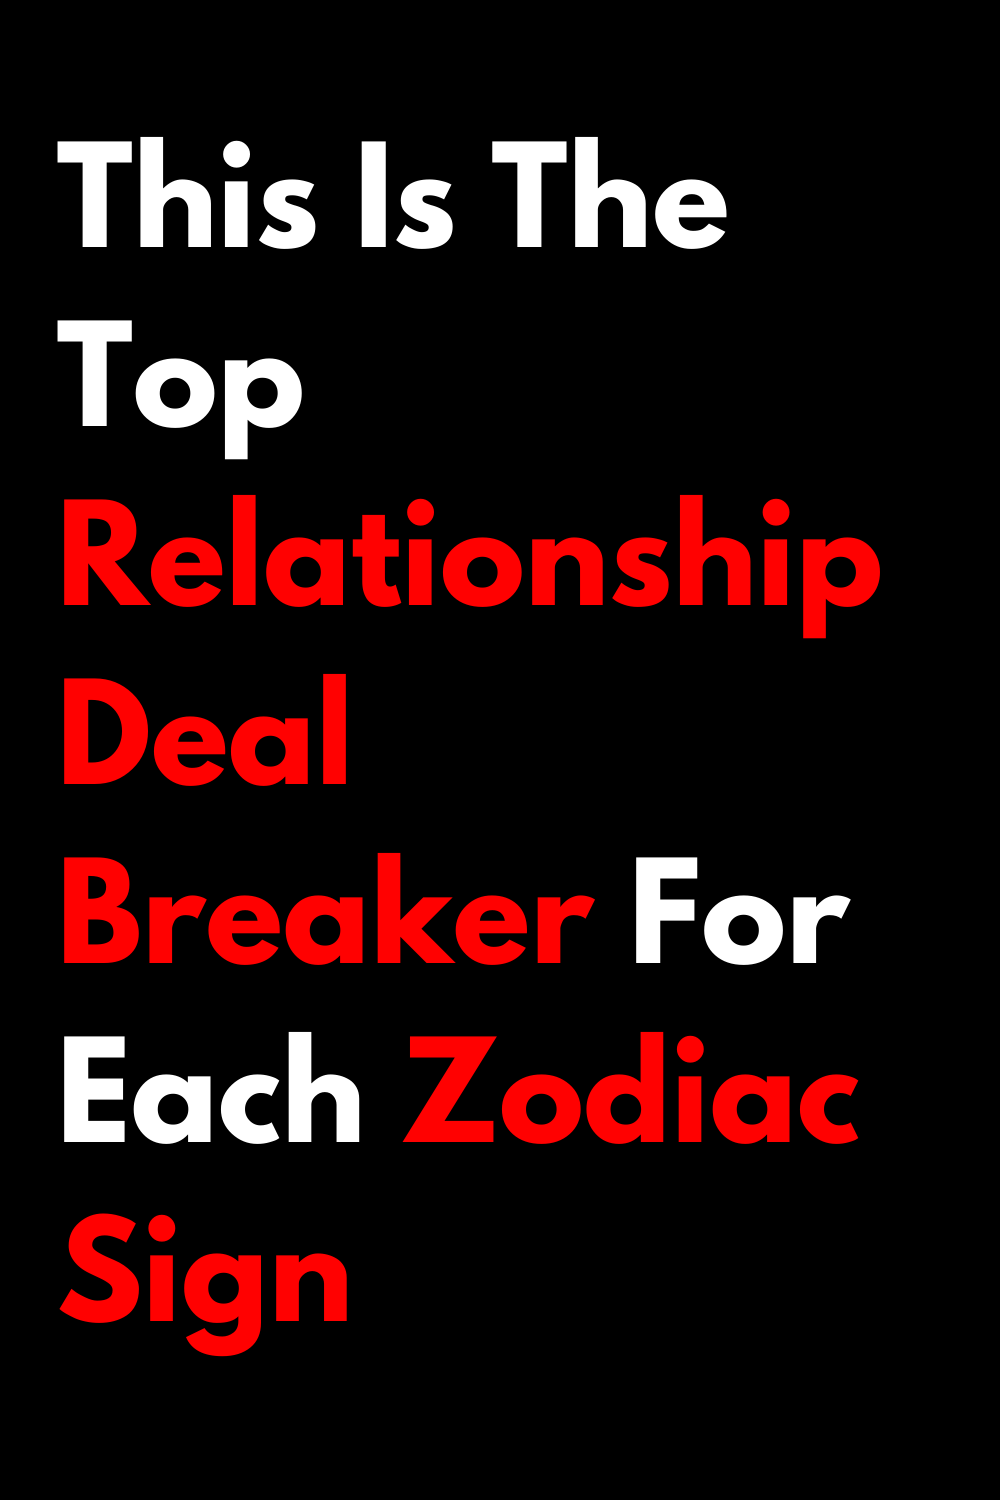 This Is The Top Relationship Deal Breaker For Each Zodiac Sign